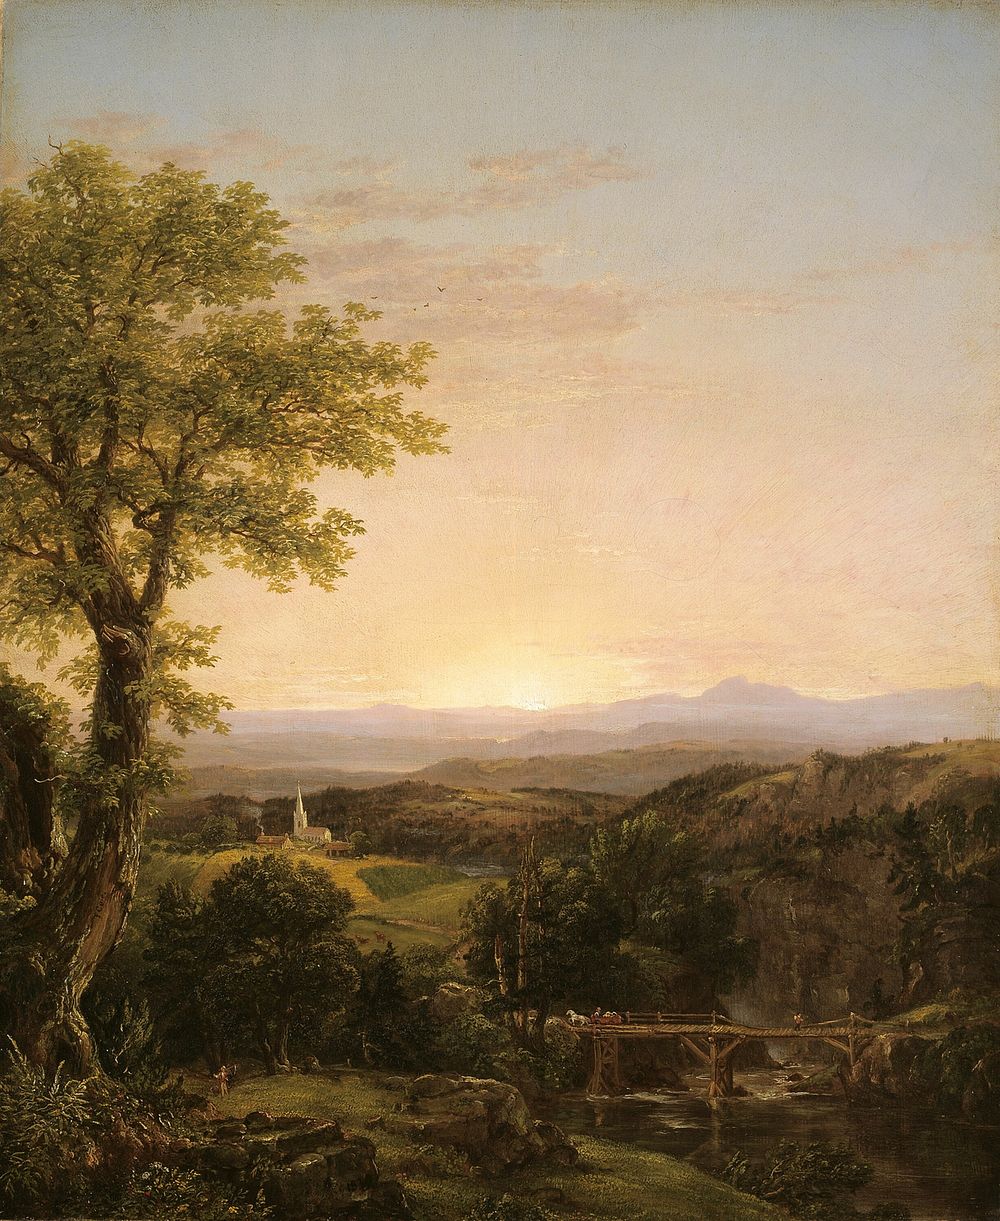 New England Scenery by Thomas Cole